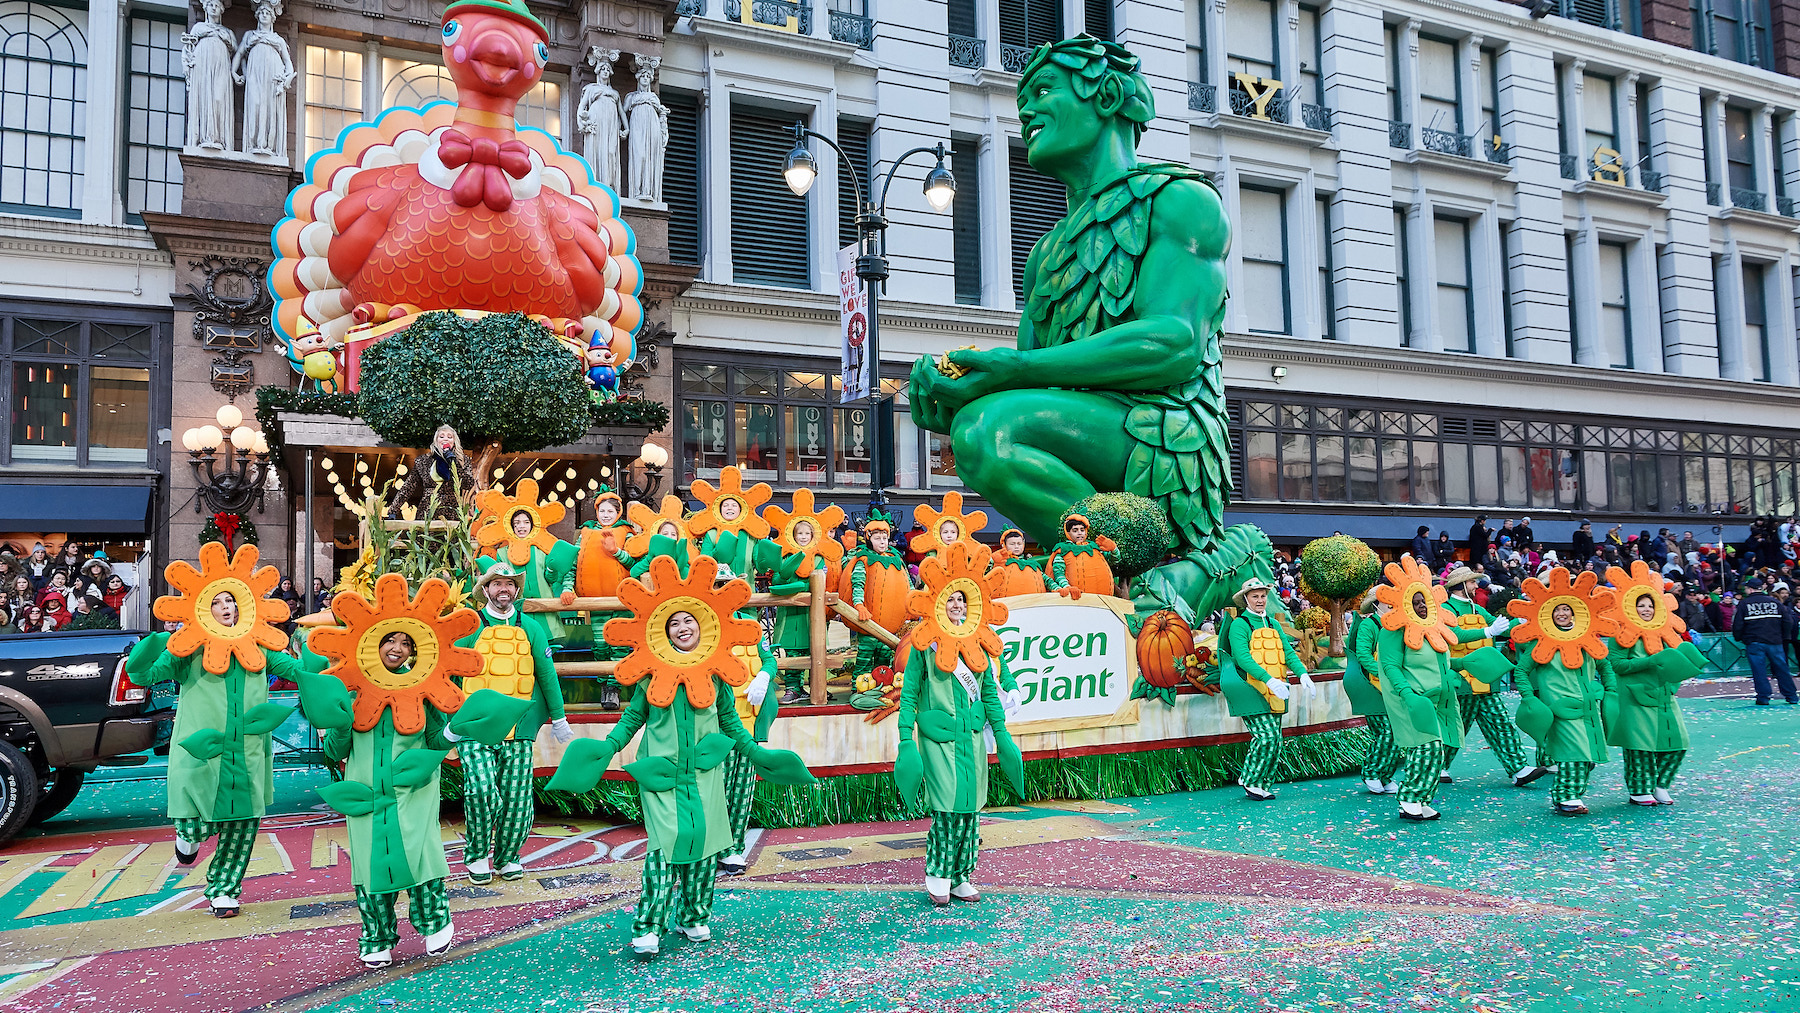 Agriculture icon floats through Macy's Thanksgiving Day parade